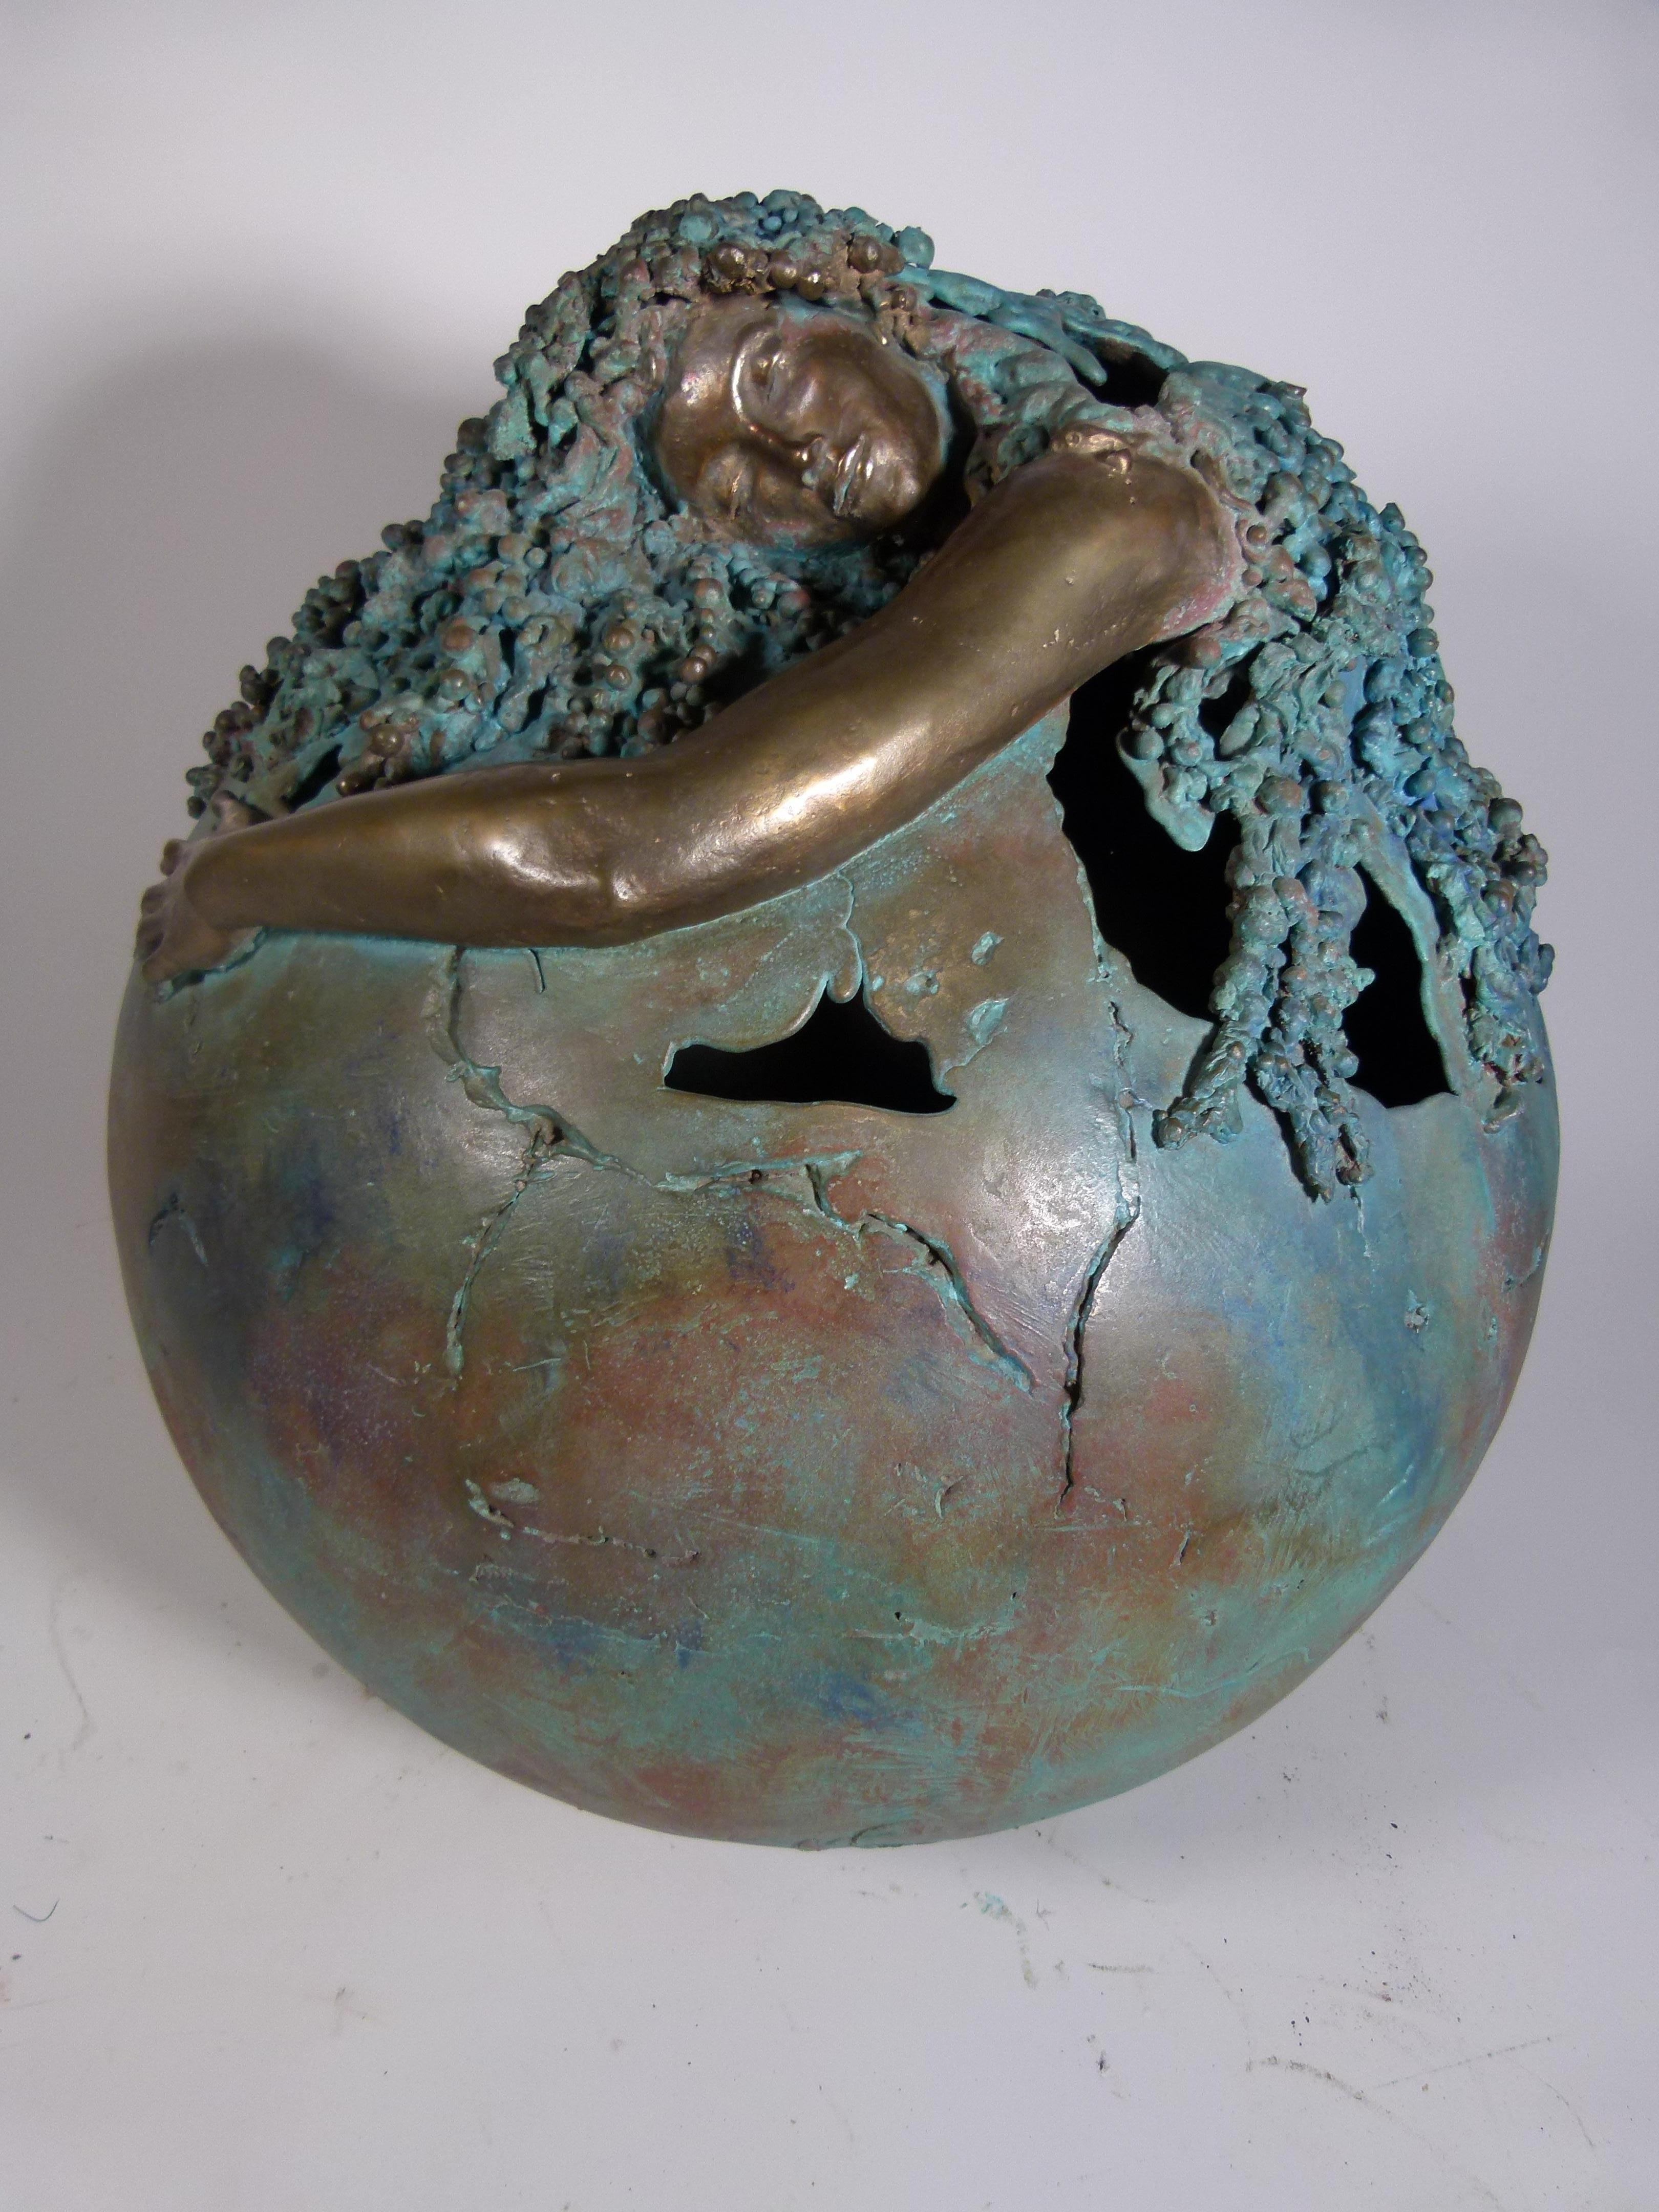 Amazing sculpture from Jean-Jaques Argueyrolles, representing a women embracing and protecting the earth. Her hair makes us remember the ocean, unifying her and earth in one.
One could interpret this sculpture as a symbol of our Mother Earth that